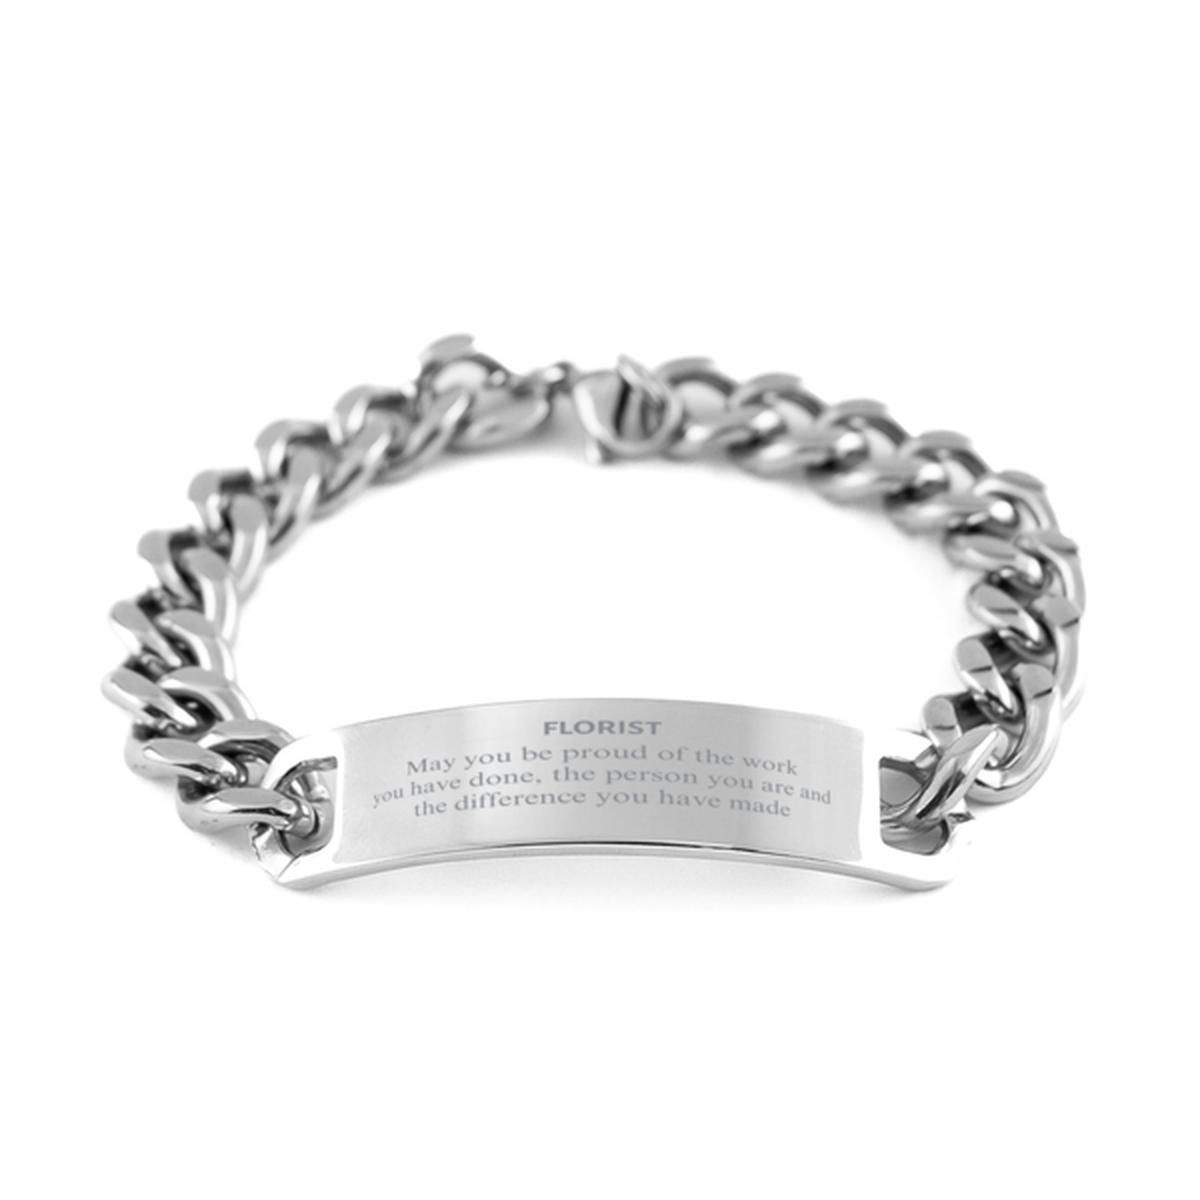 Florist May you be proud of the work you have done, Retirement Florist Cuban Chain Stainless Steel Bracelet for Colleague Appreciation Gifts Amazing for Florist